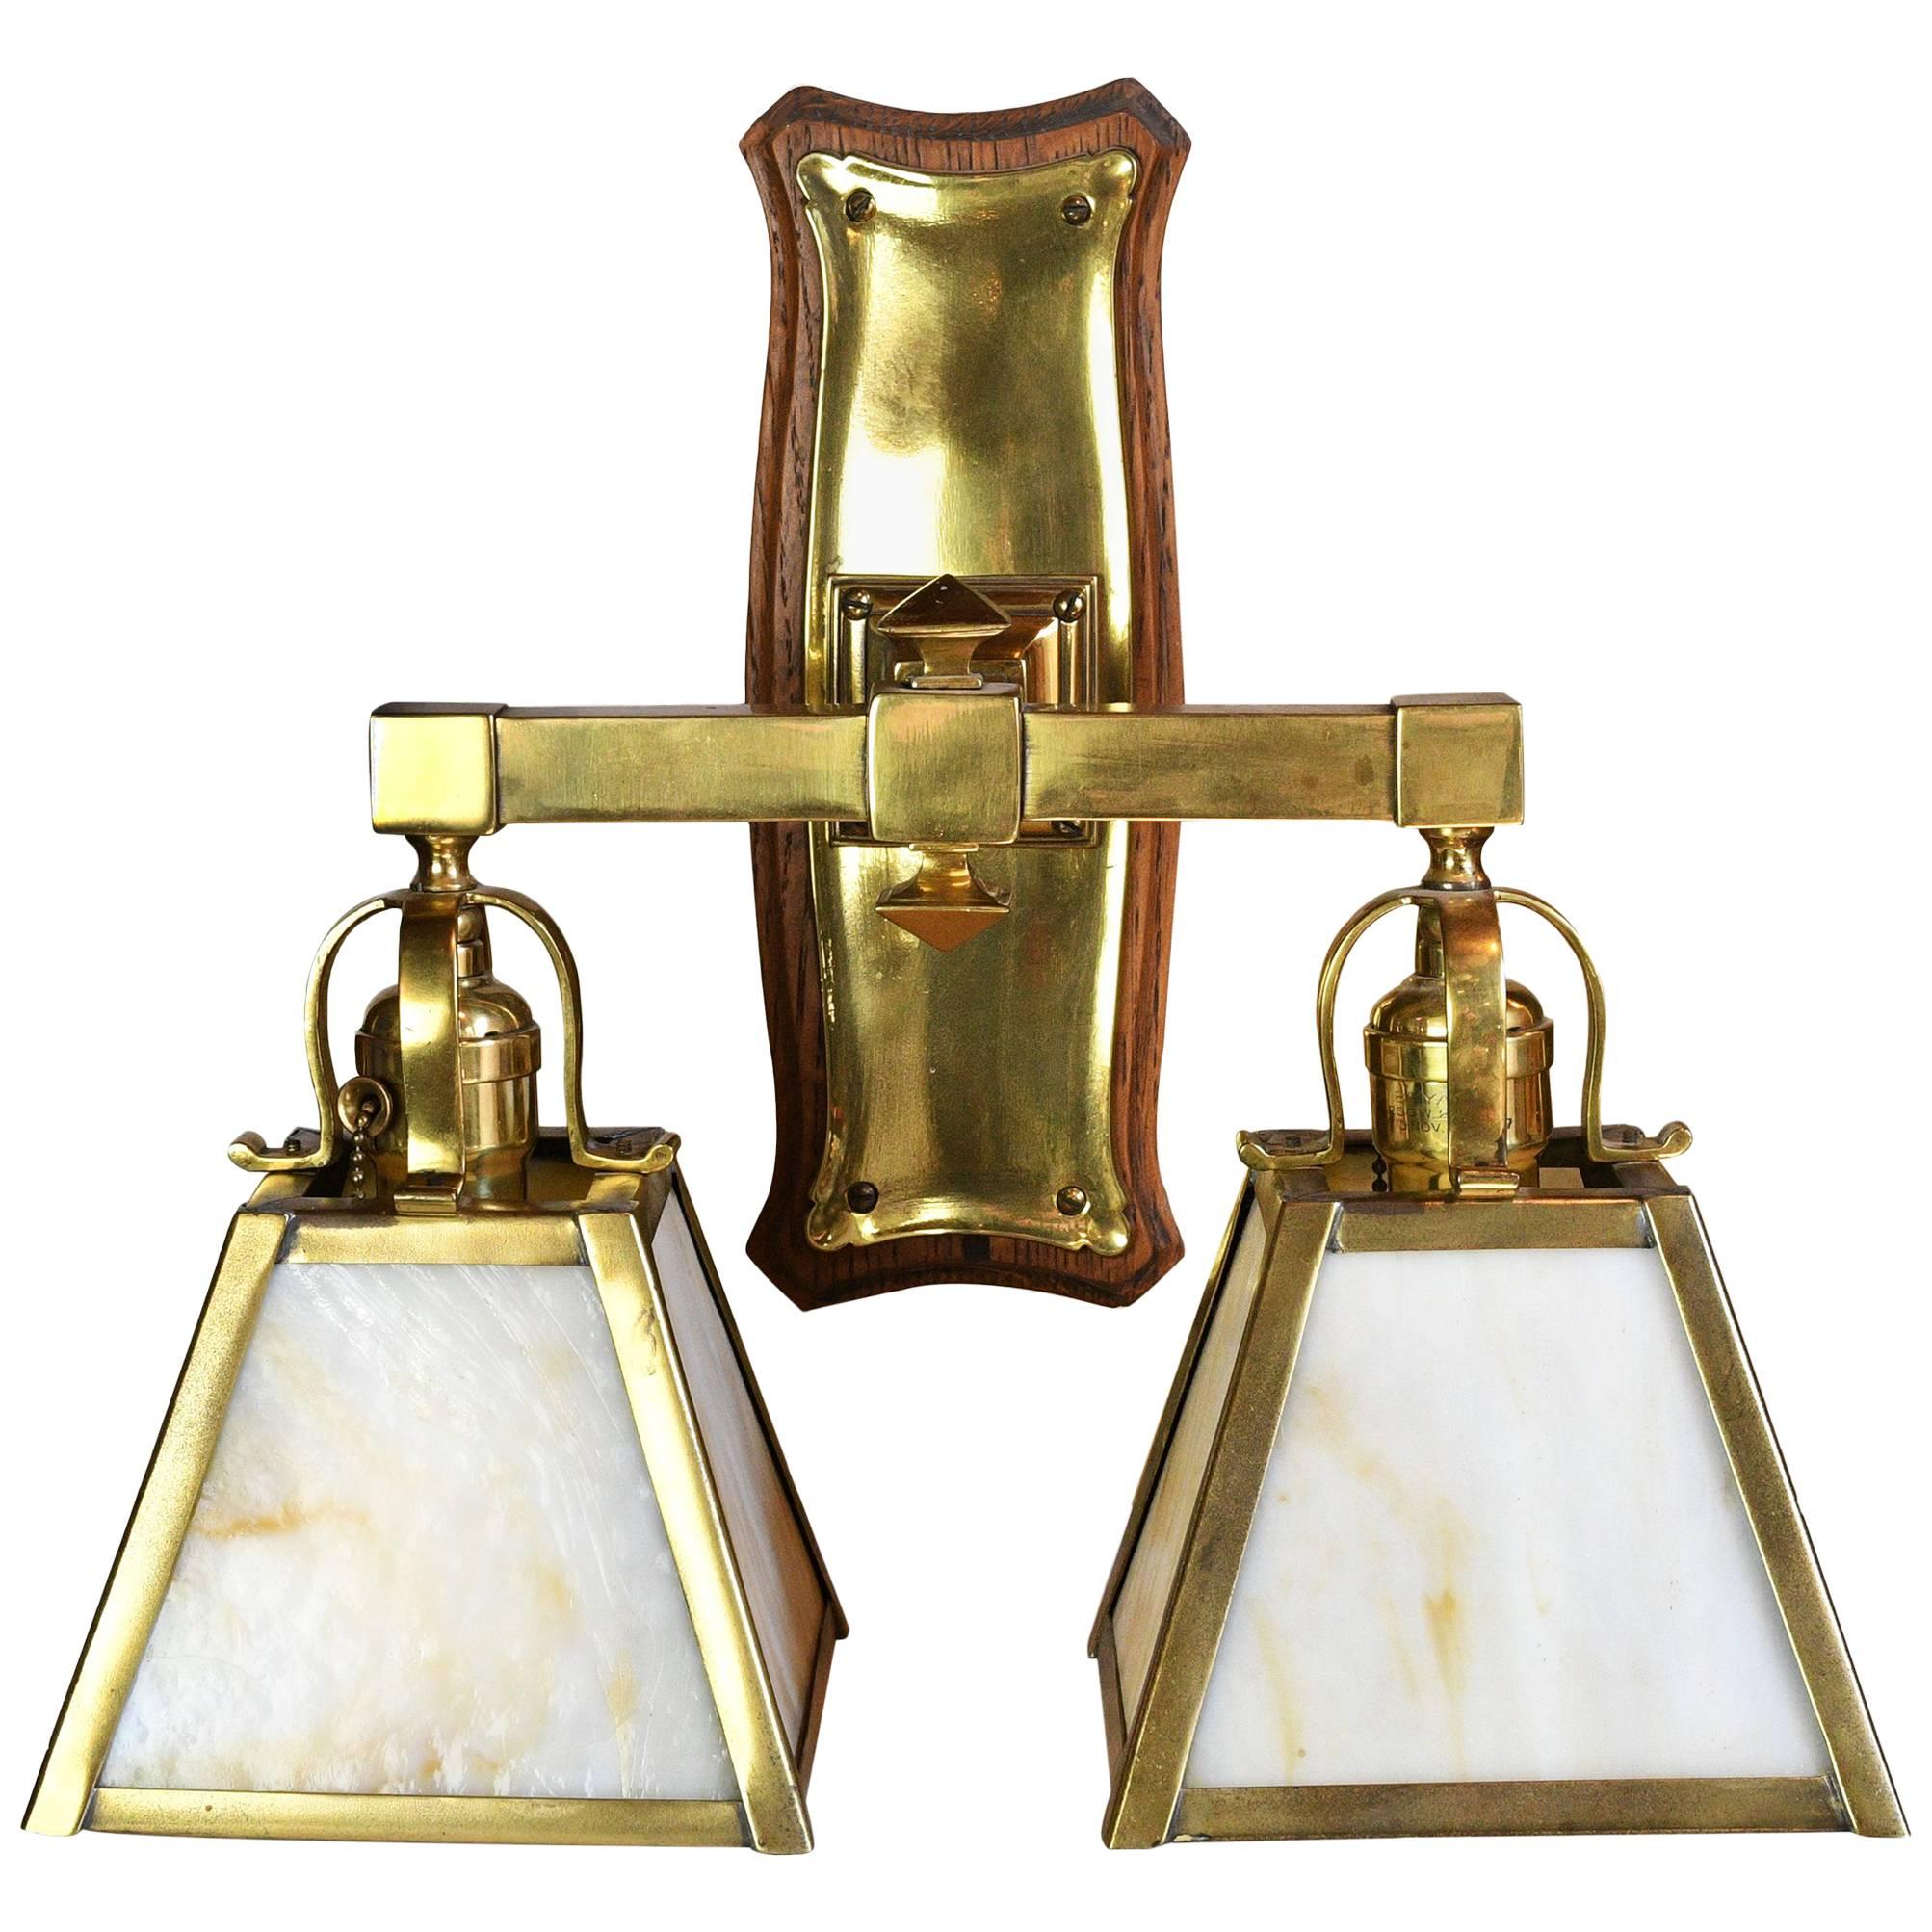 Two Arm Sconce with Wood Back Plate and Slag Glass Shades